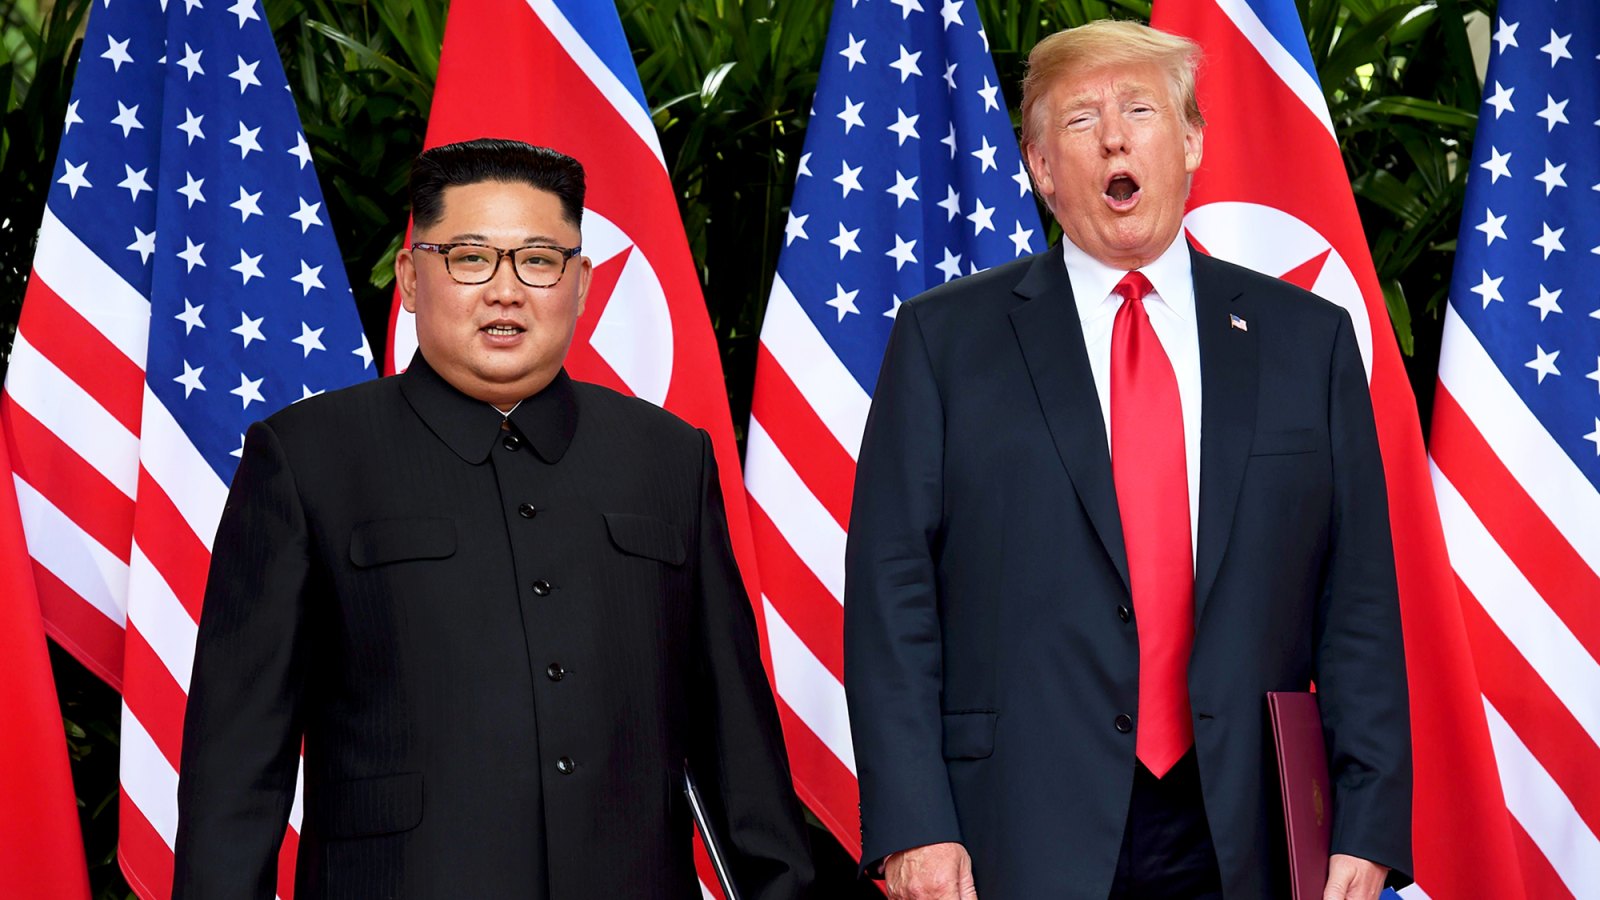 Kim Jong Un and Donald Trump after taking part in a signing ceremony at the end of their historic U.S.-North Korea summit at the Capella Hotel on Sentosa island in Singapore on June 12, 2018.